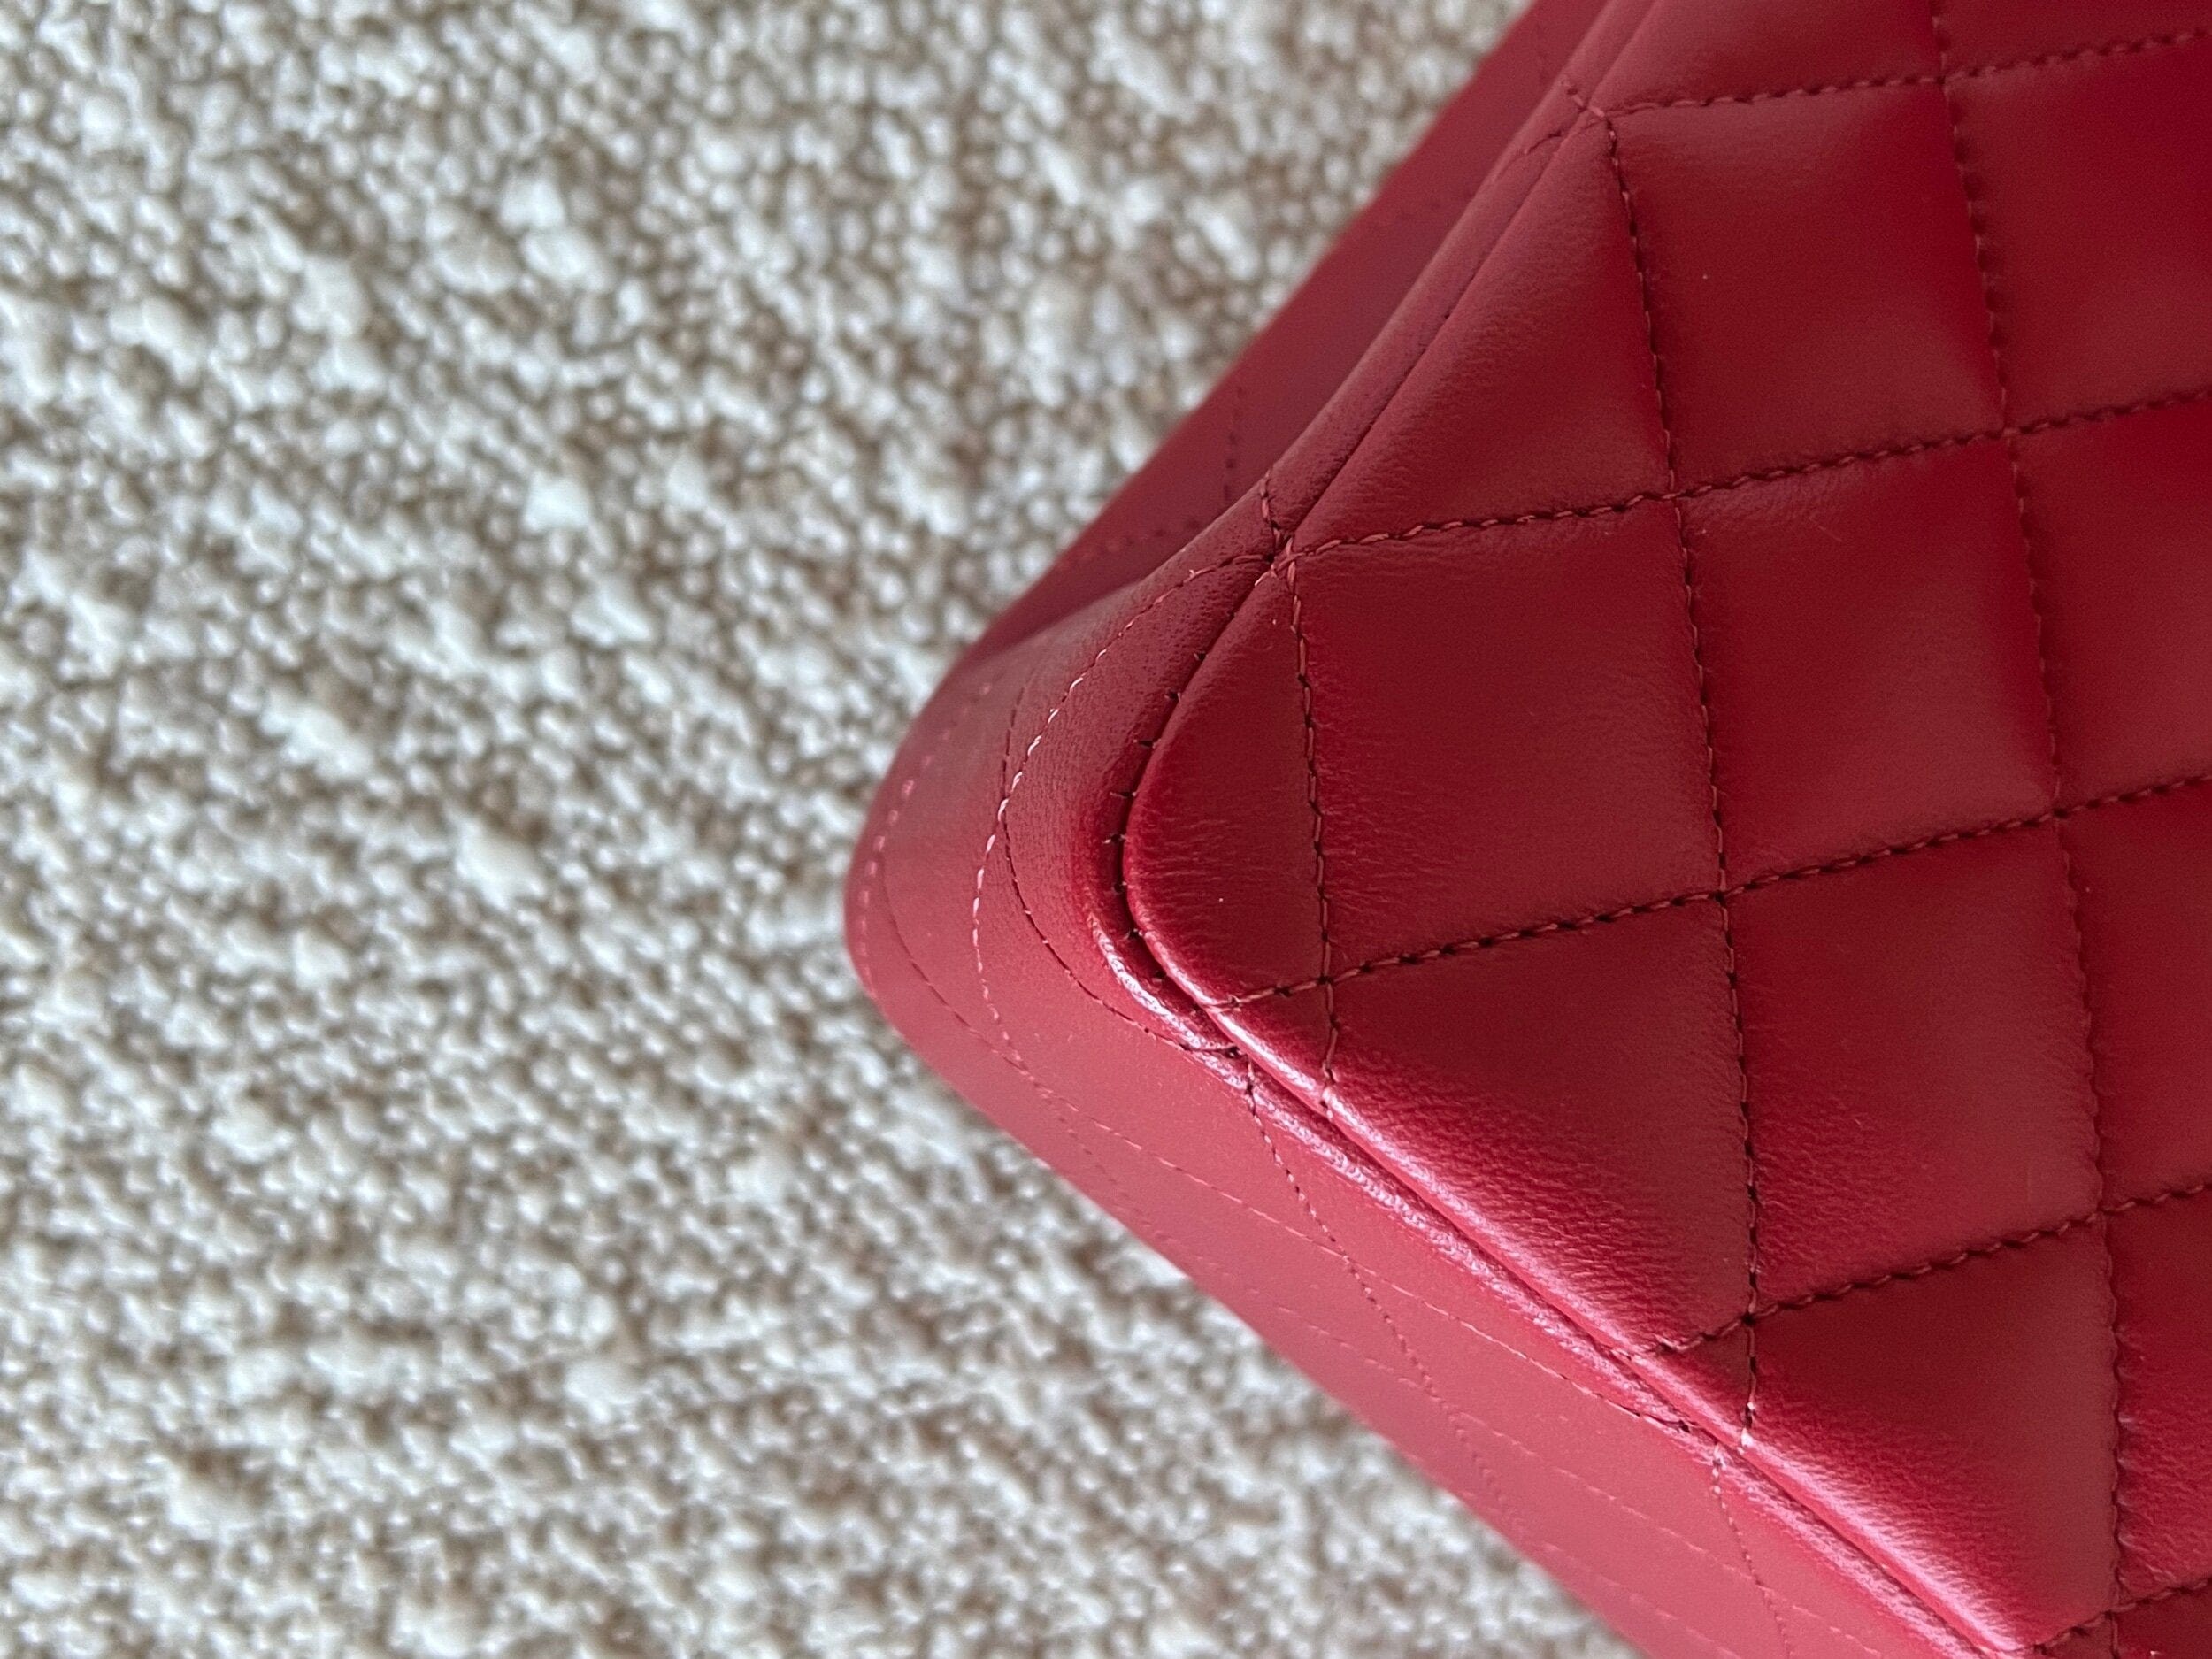 CHANEL Handbag 20B Red Lambskin Quilted Classic Flap Medium SHW - Redeluxe